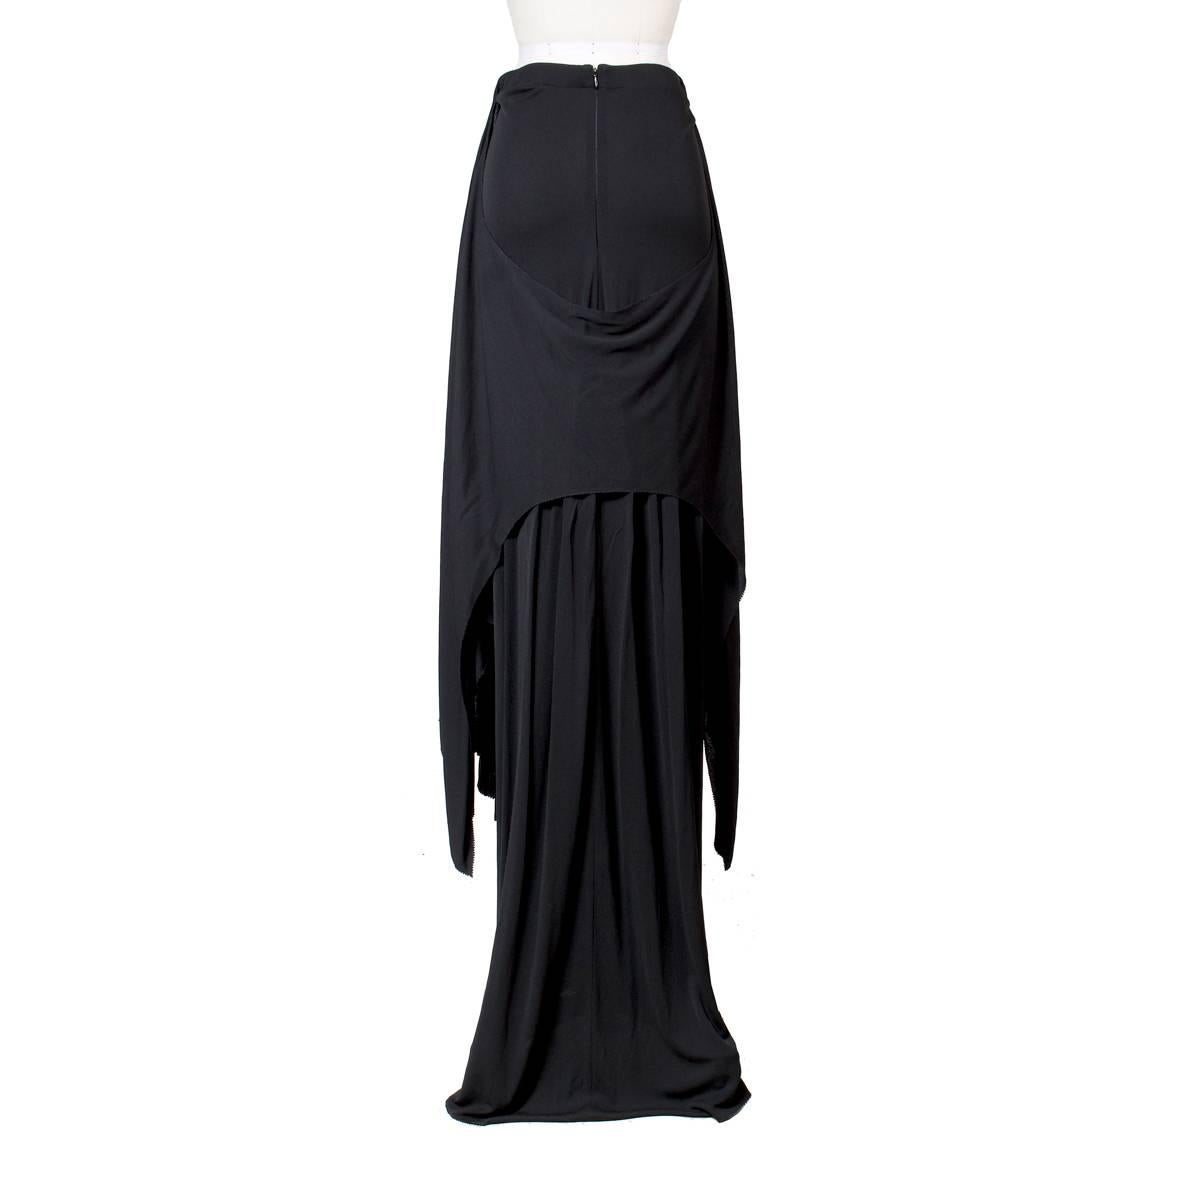 This is a black maxi skirt by Jean Paul Gaultier c. 2000s.  It features a drape to create angles from front to back.  Hidden back zipper closure.